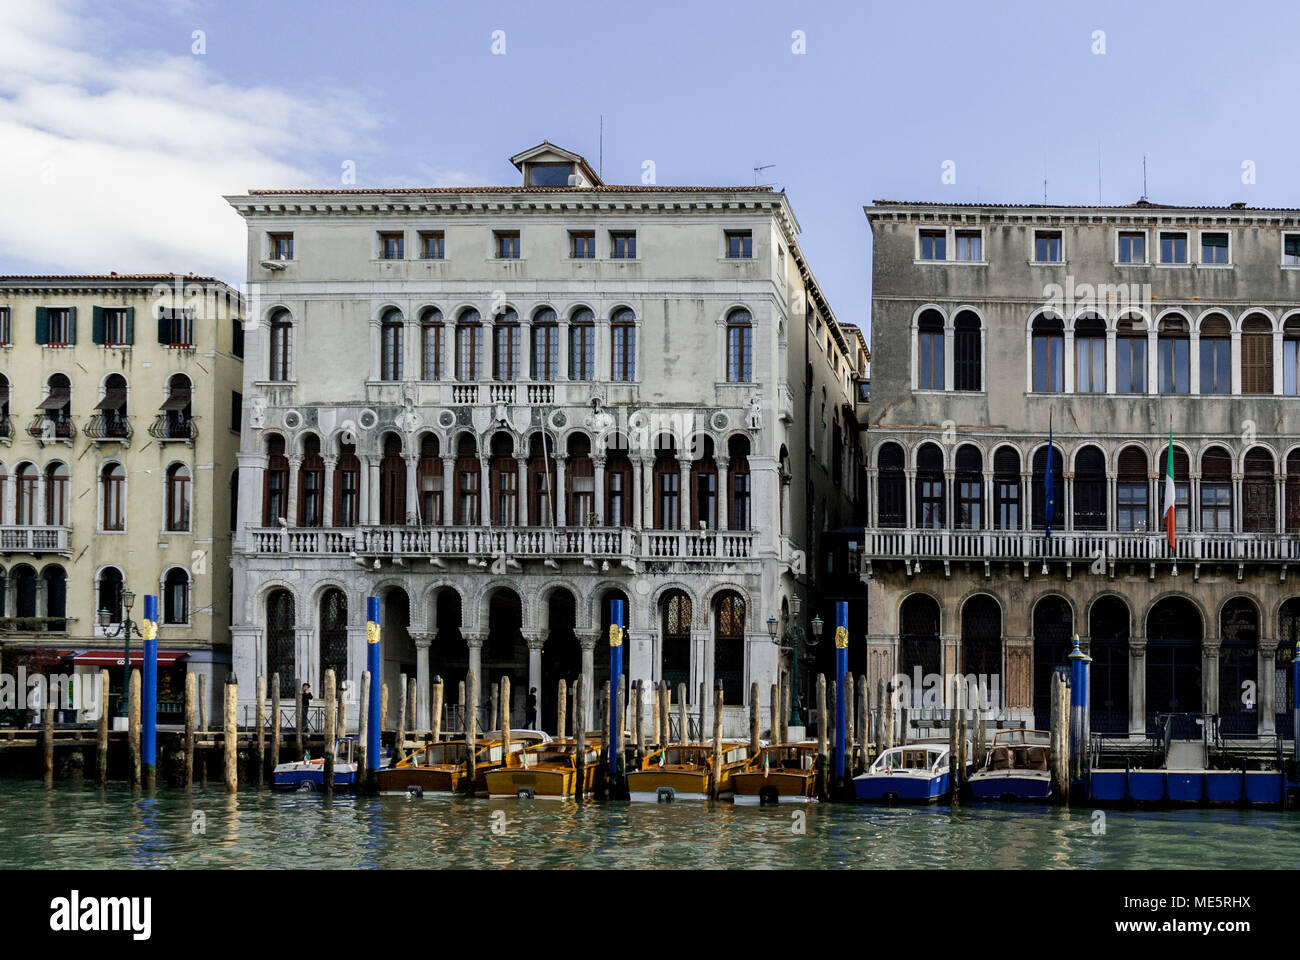 VENICE-MARCH 9:beautiful palace on the venetian Grand Canal,Venice,Italy,on March 9,2017. Stock Photo